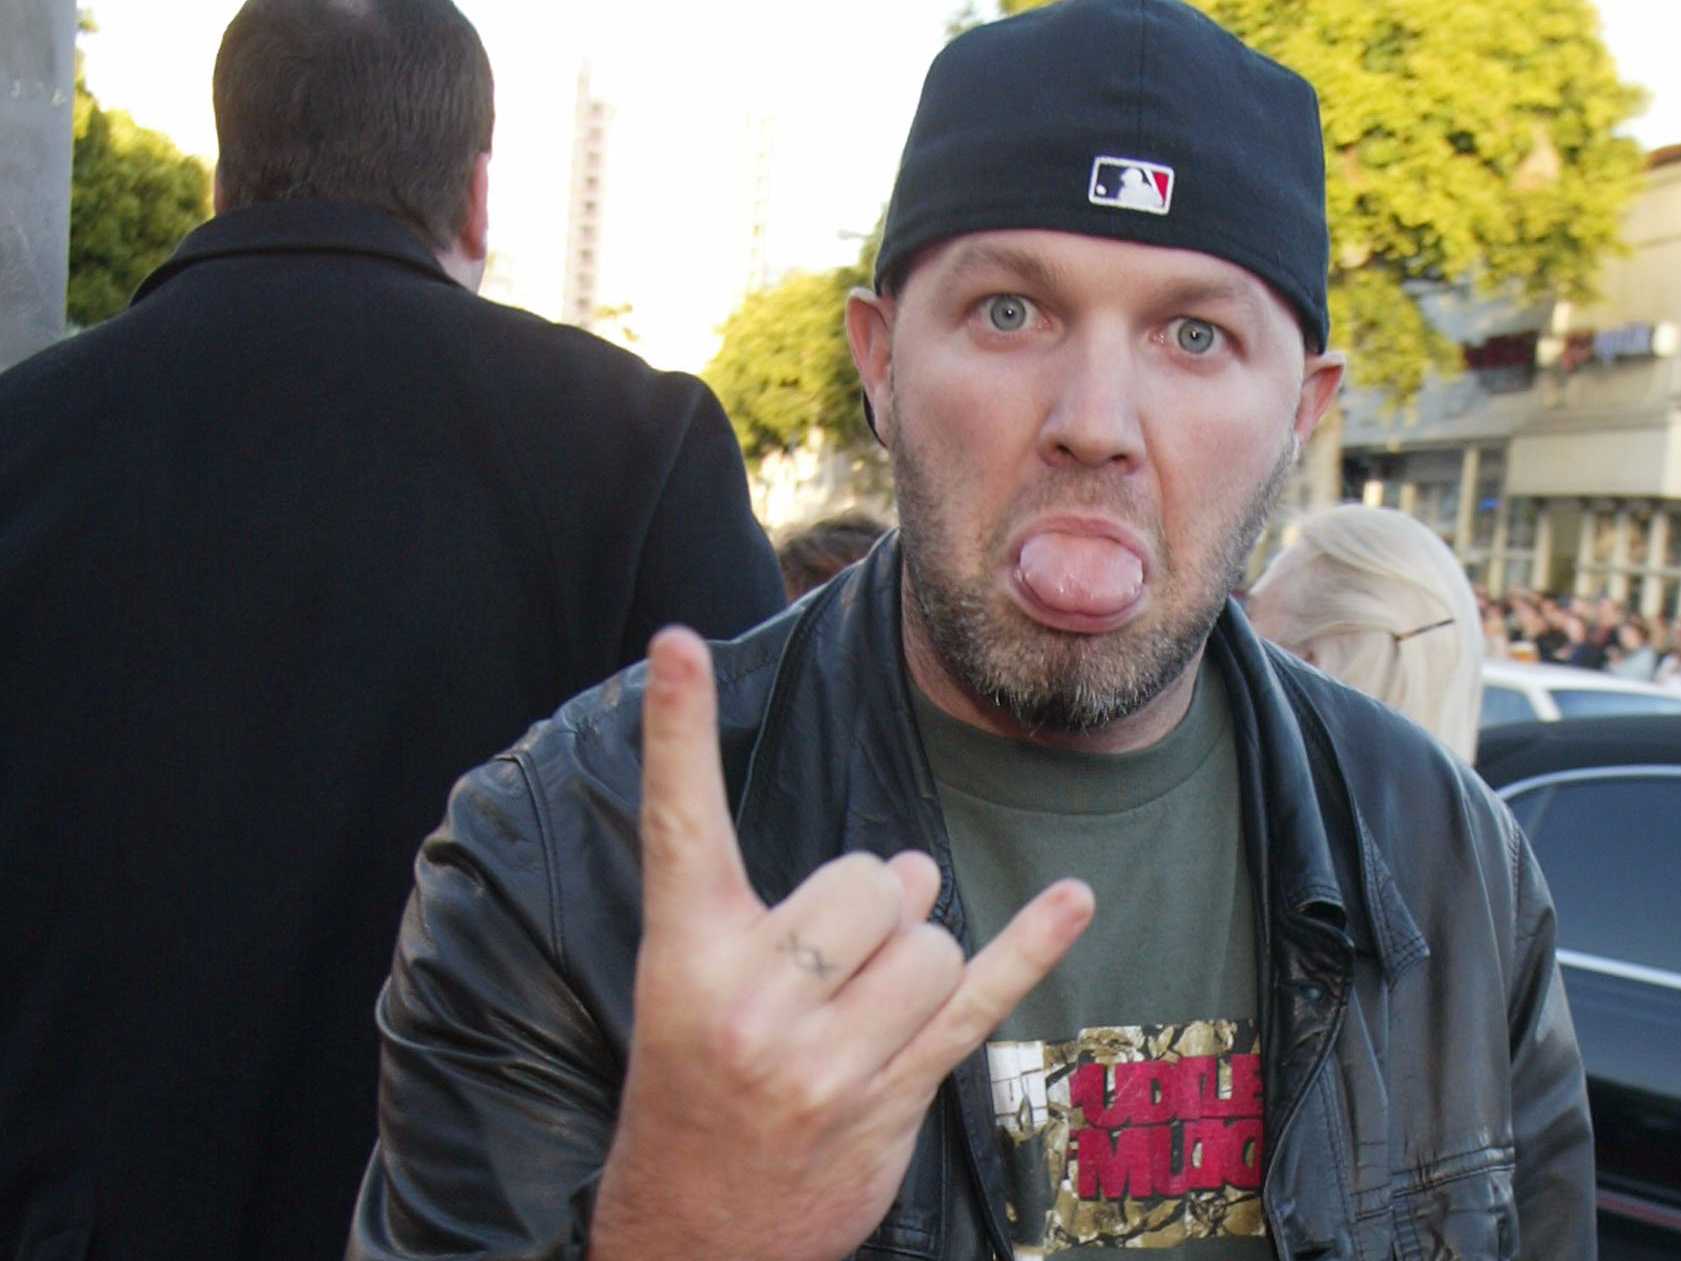 HE DID IT ALL FOR THE NOOKIE HAPPY BIRTHDAY FRED DURST HE DRINKS WEIRD BRAND OF ENERGY DRINKS 